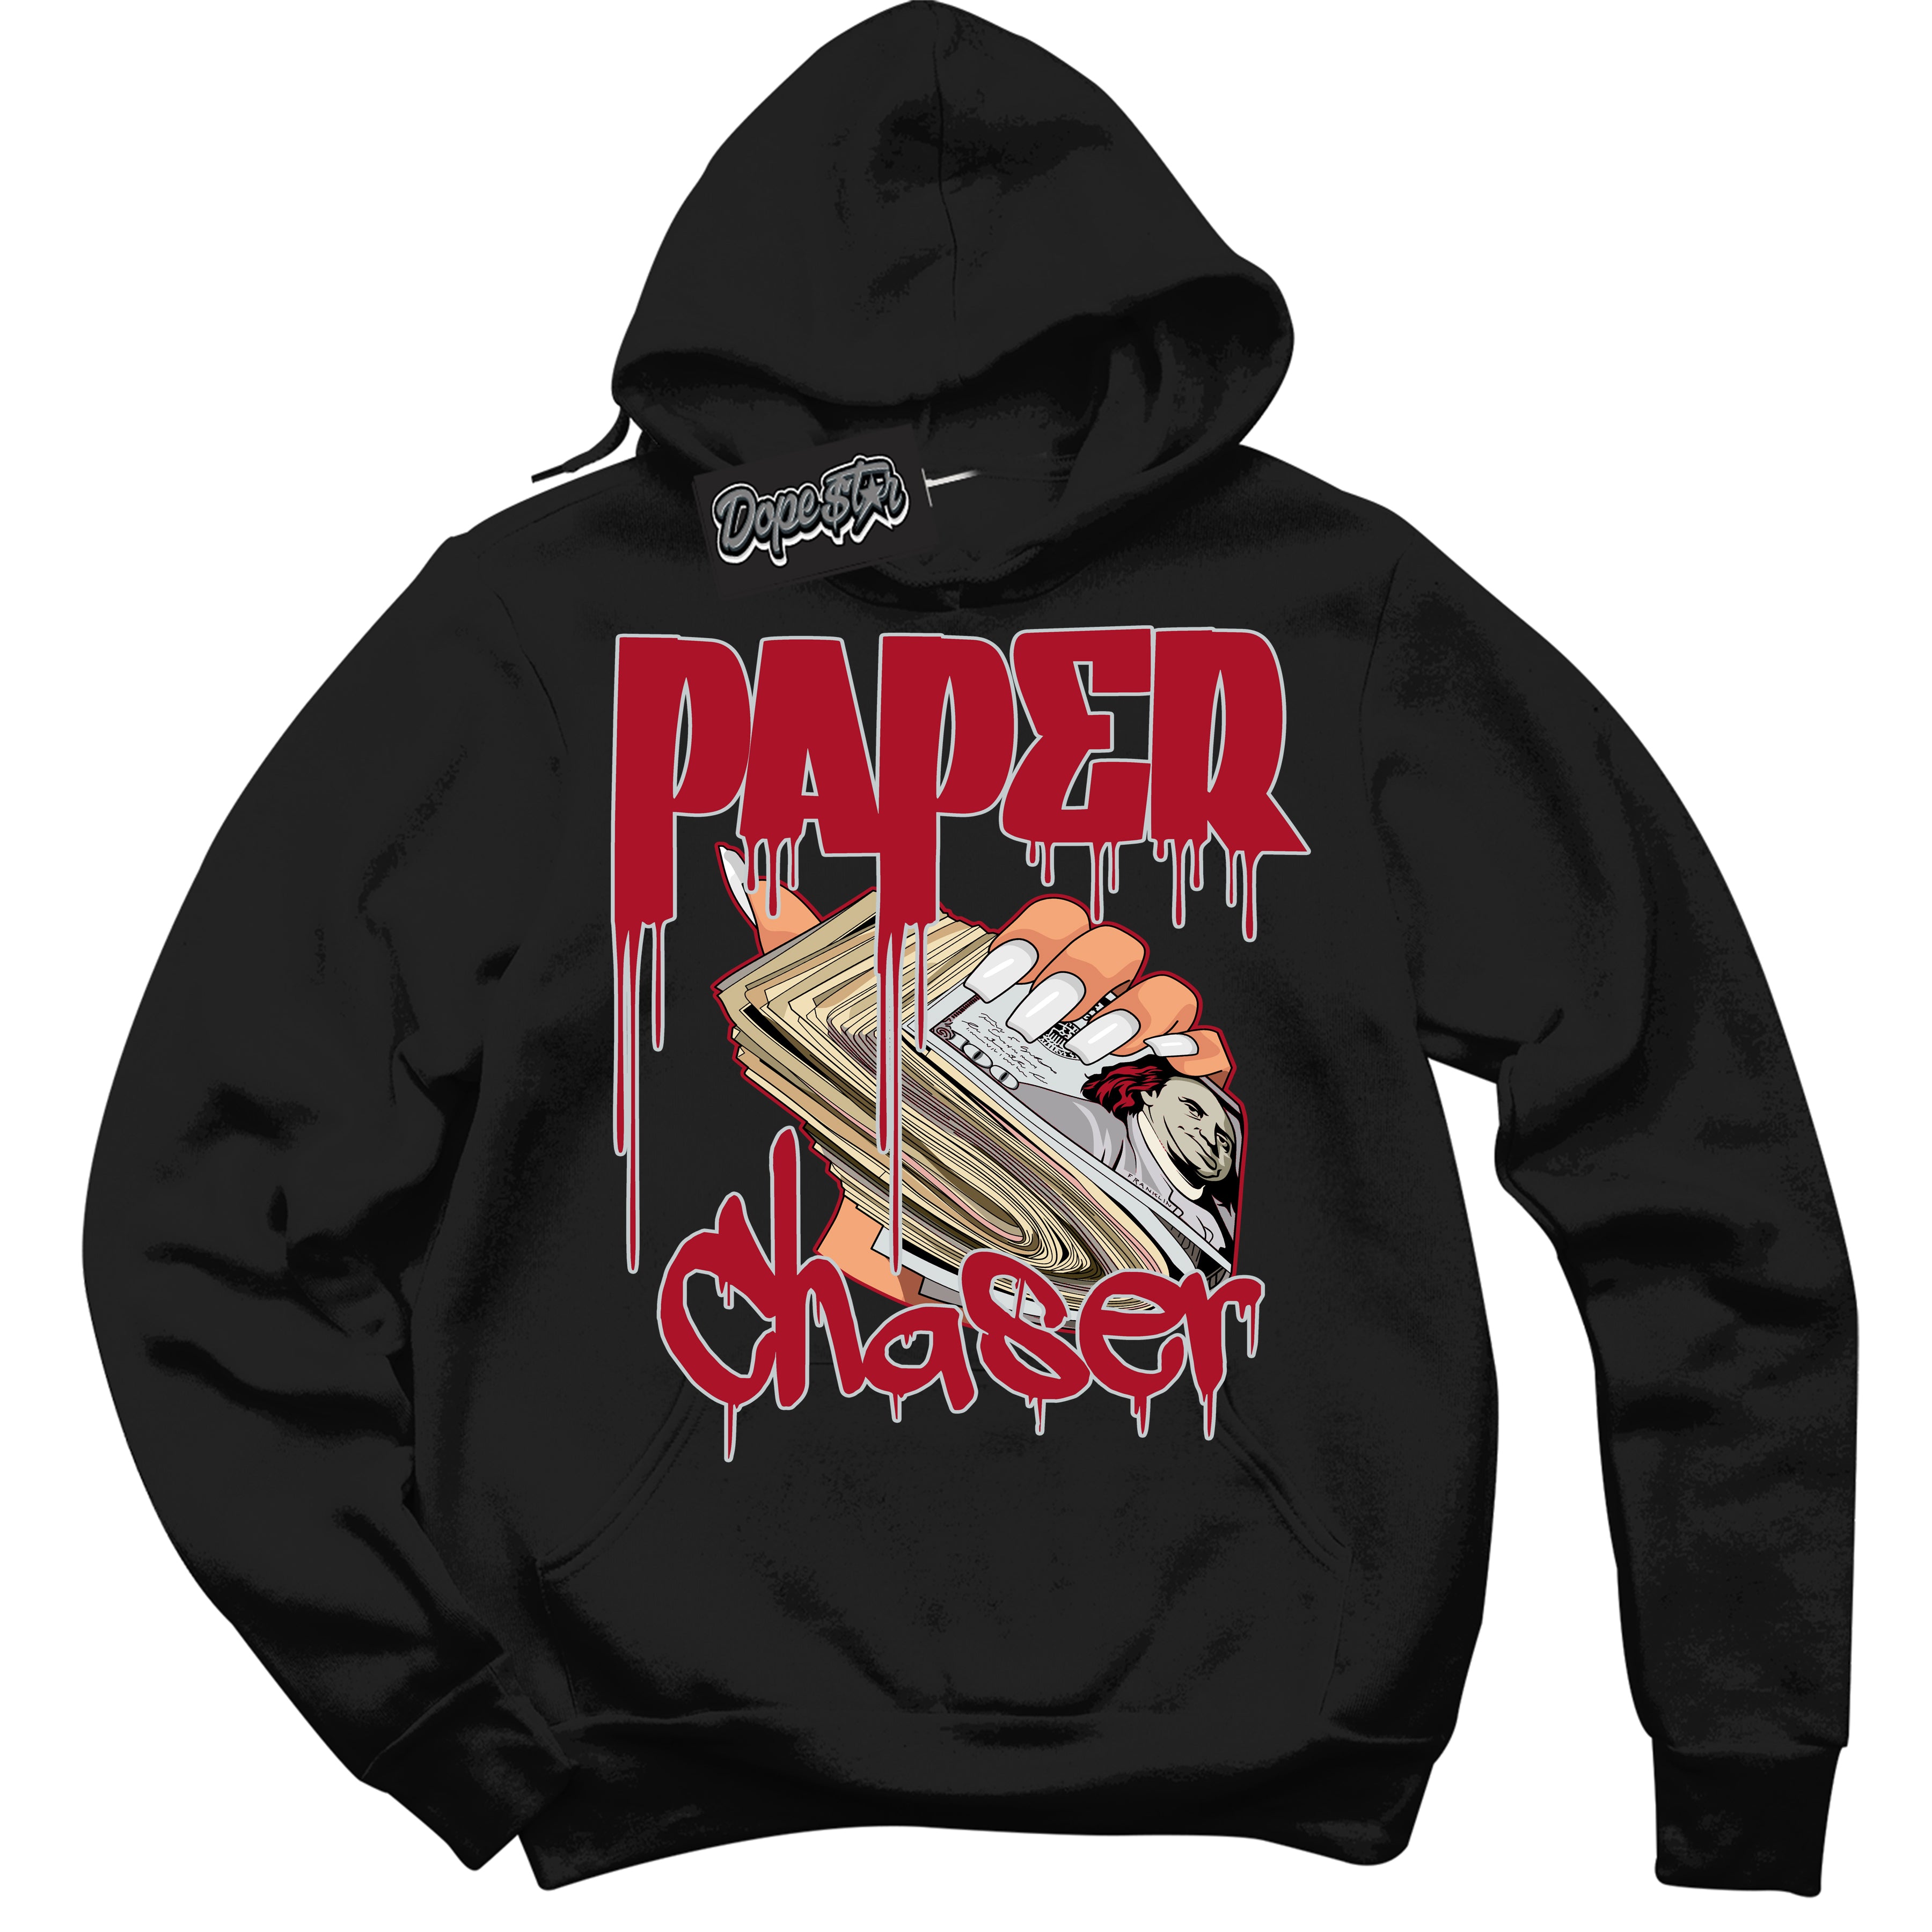 Cool Black Hoodie with “ Paper Chaser ”  design that Perfectly Matches  Reverse Ultraman Sneakers.